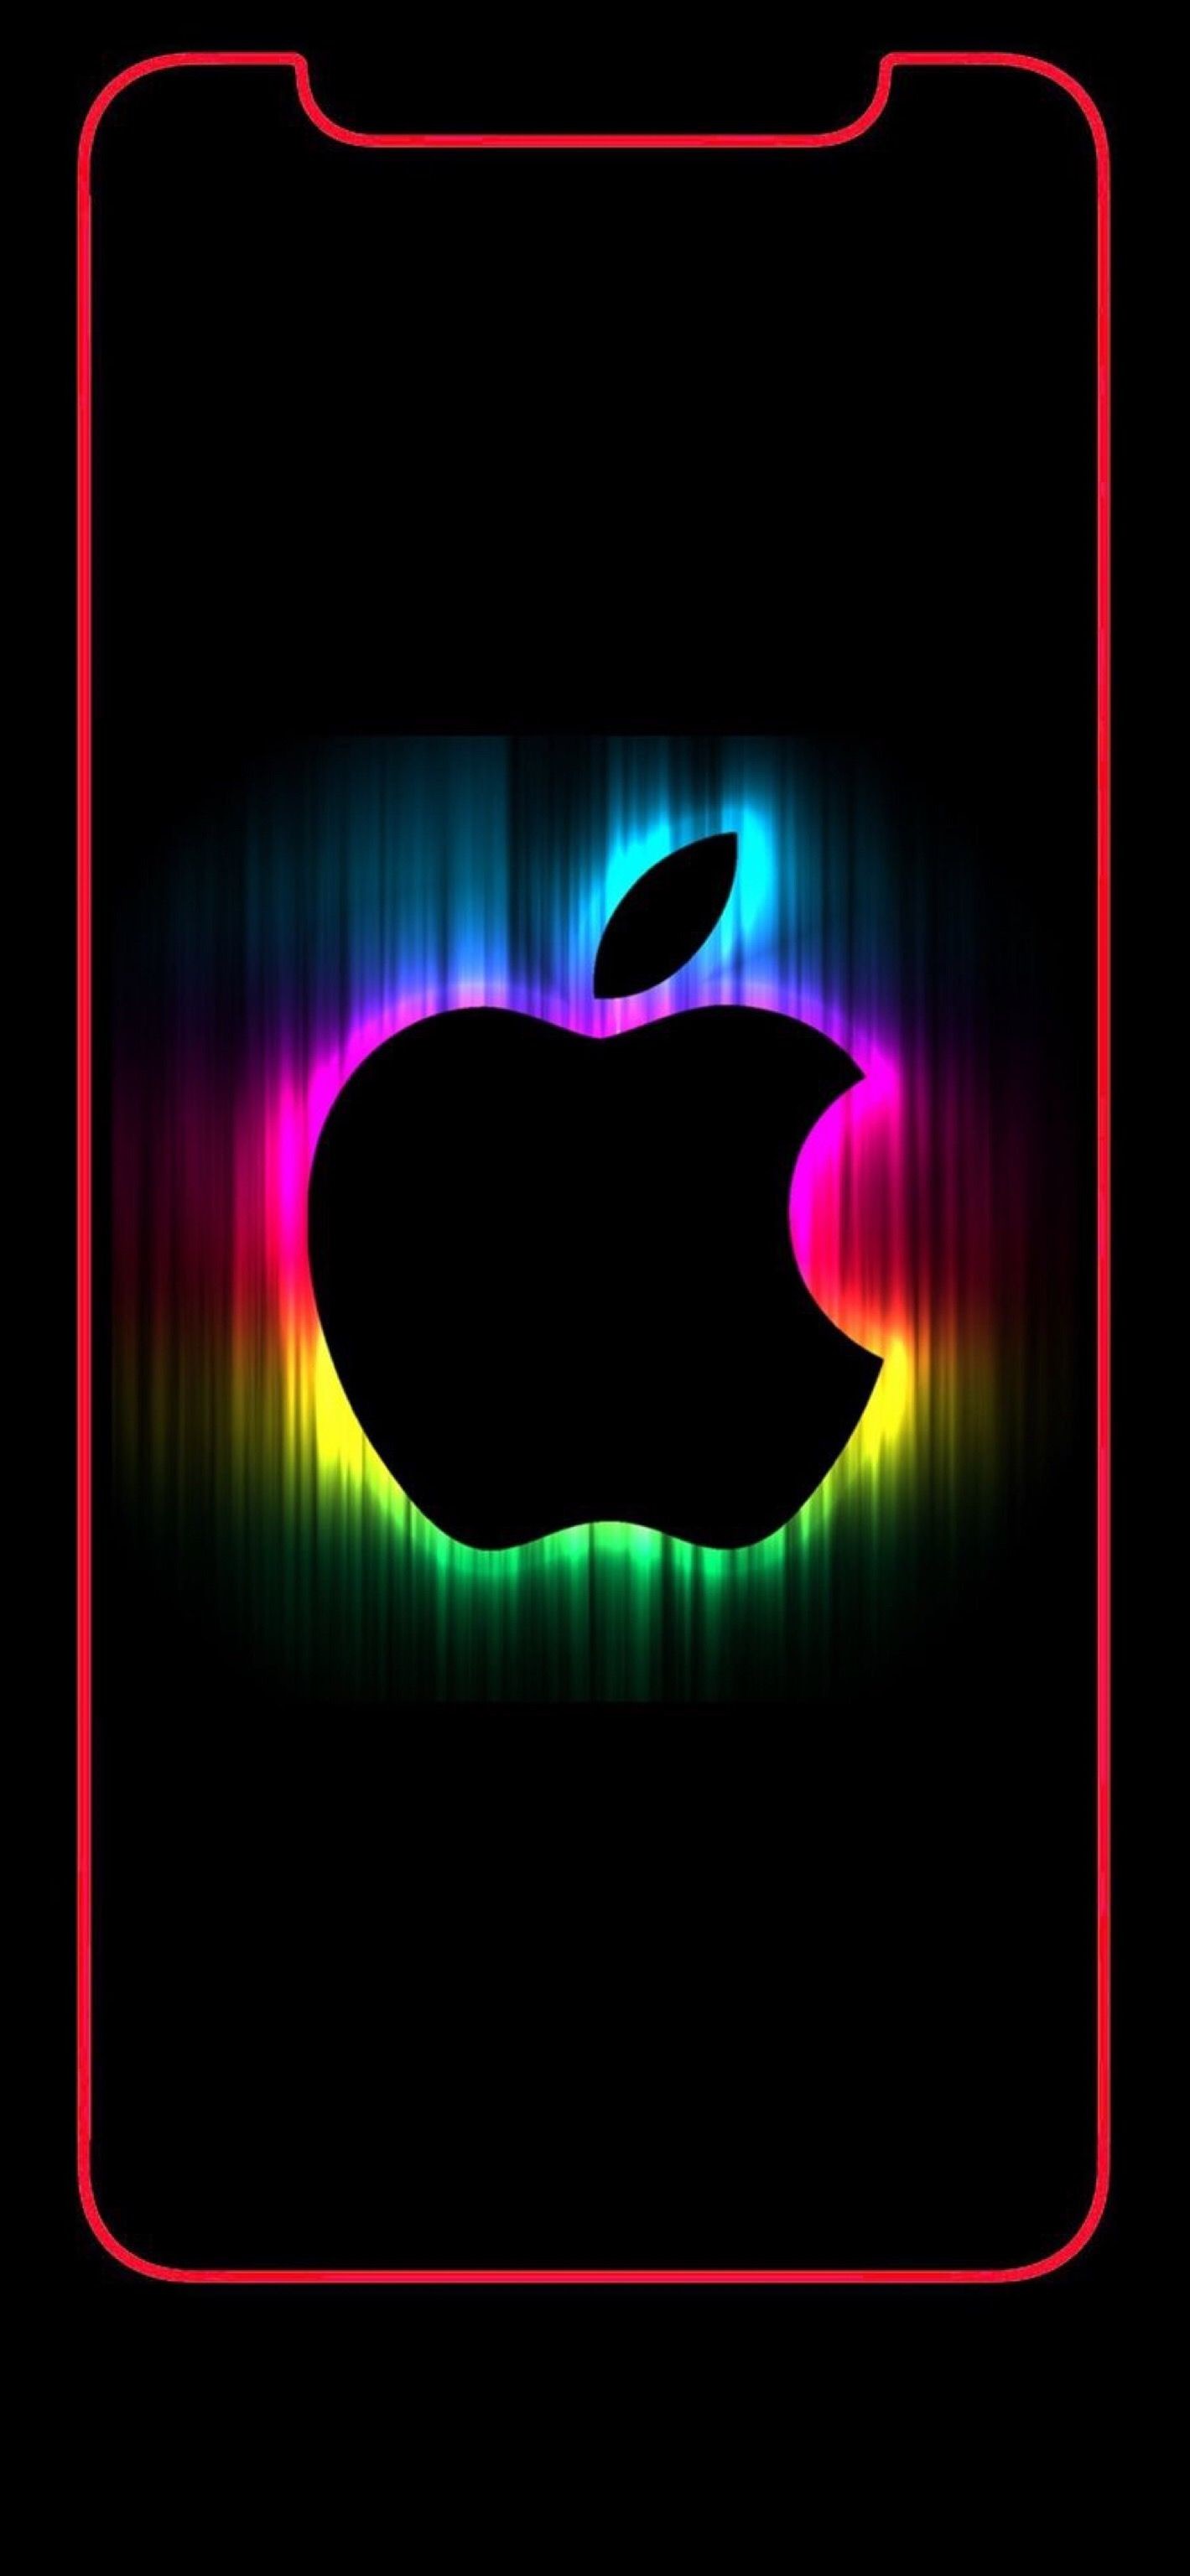 Apple Wallpaper (best Apple Wallpaper and image) on WallpaperChat